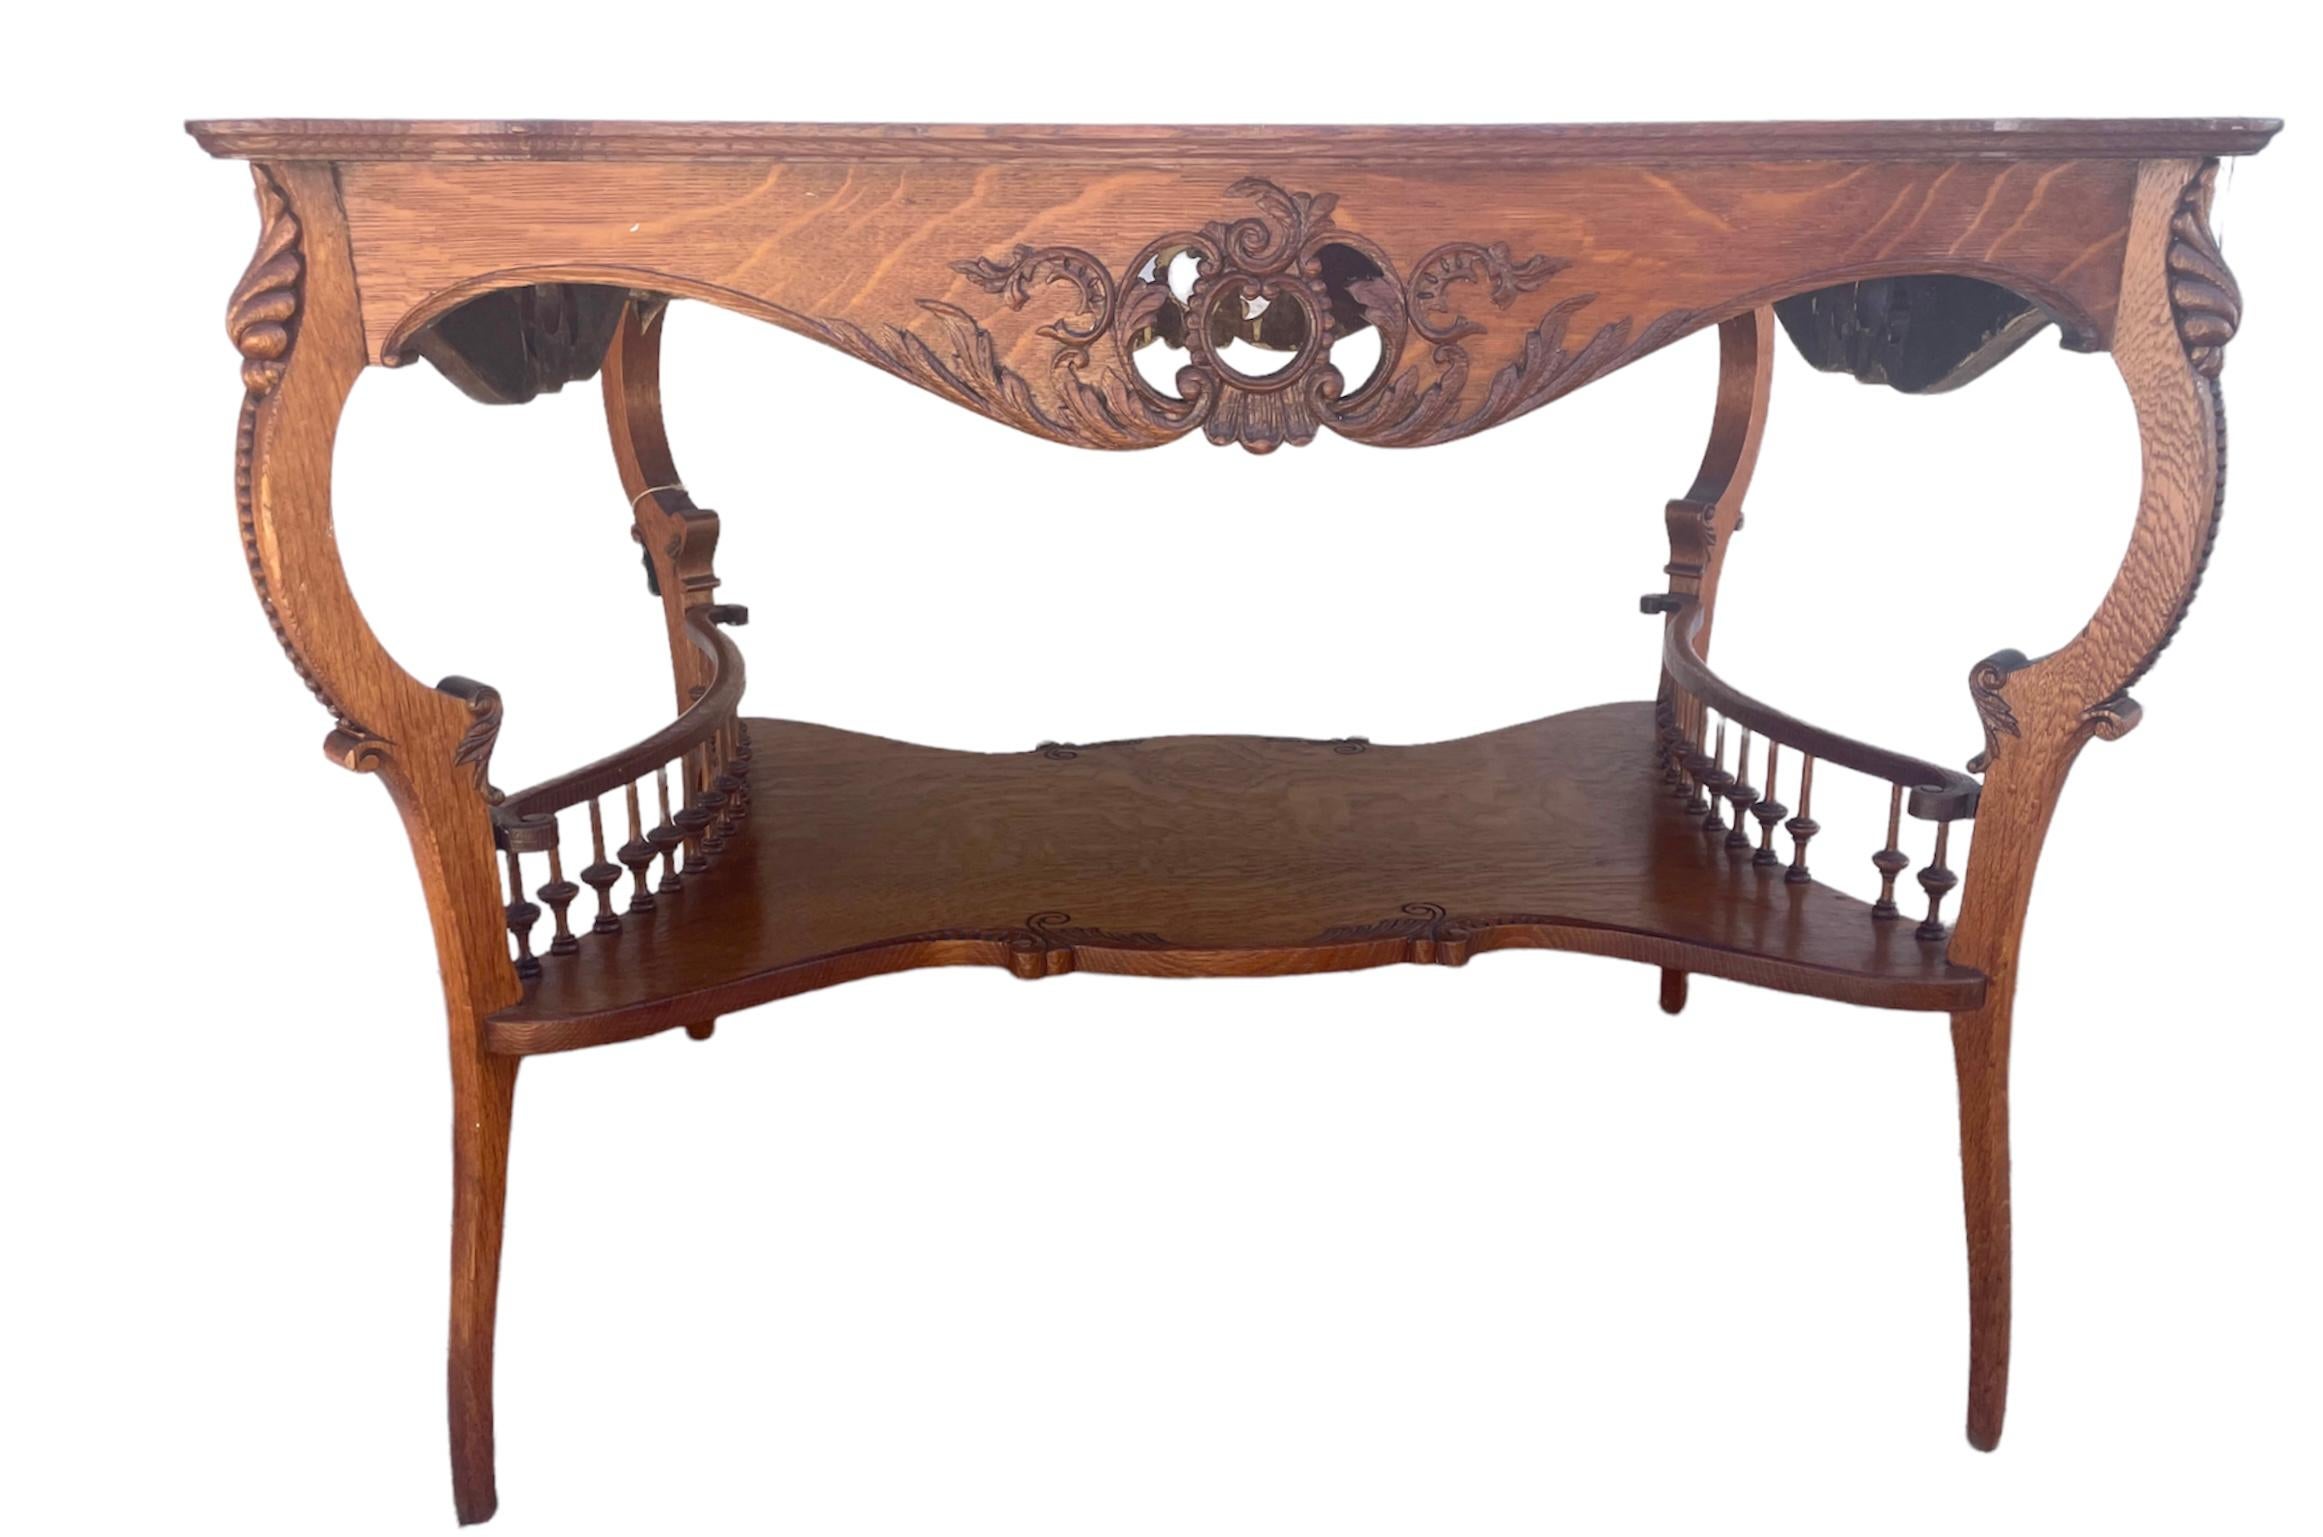 What a beauty- this antique palour lamp table is tiger oak and is so eye catching and the carved design is spectacular and all in fantastic shape- only 1 spindle is missing. A natural split runs down the middle but not loose, structurally sound,